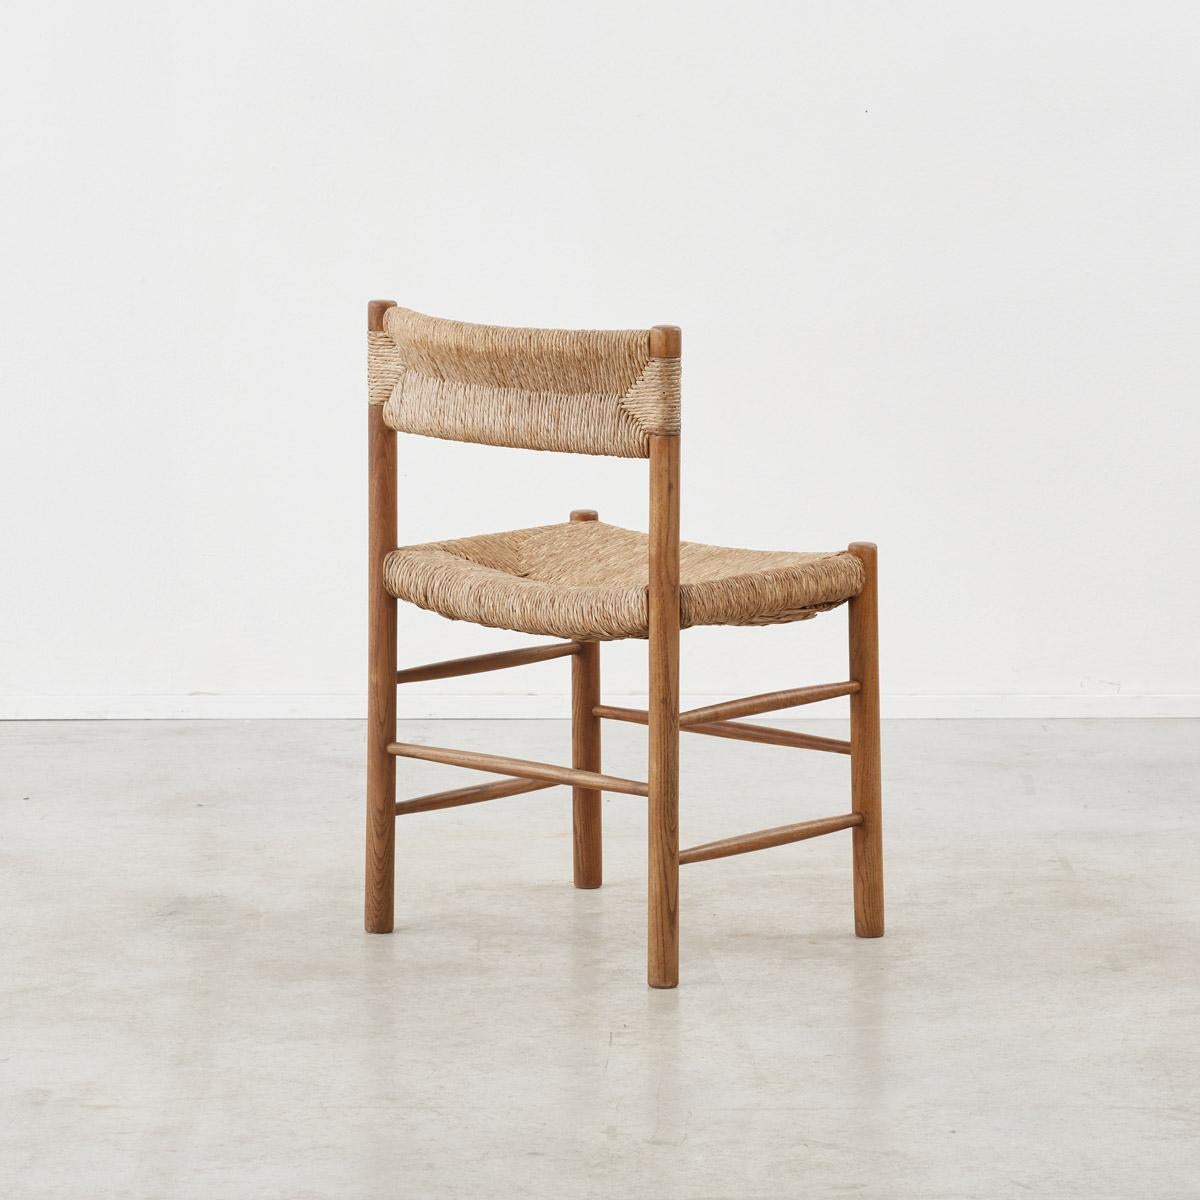 20th Century Set of Four Charlotte Perriand Dordogne Chairs for Robert Sentou, France c1950